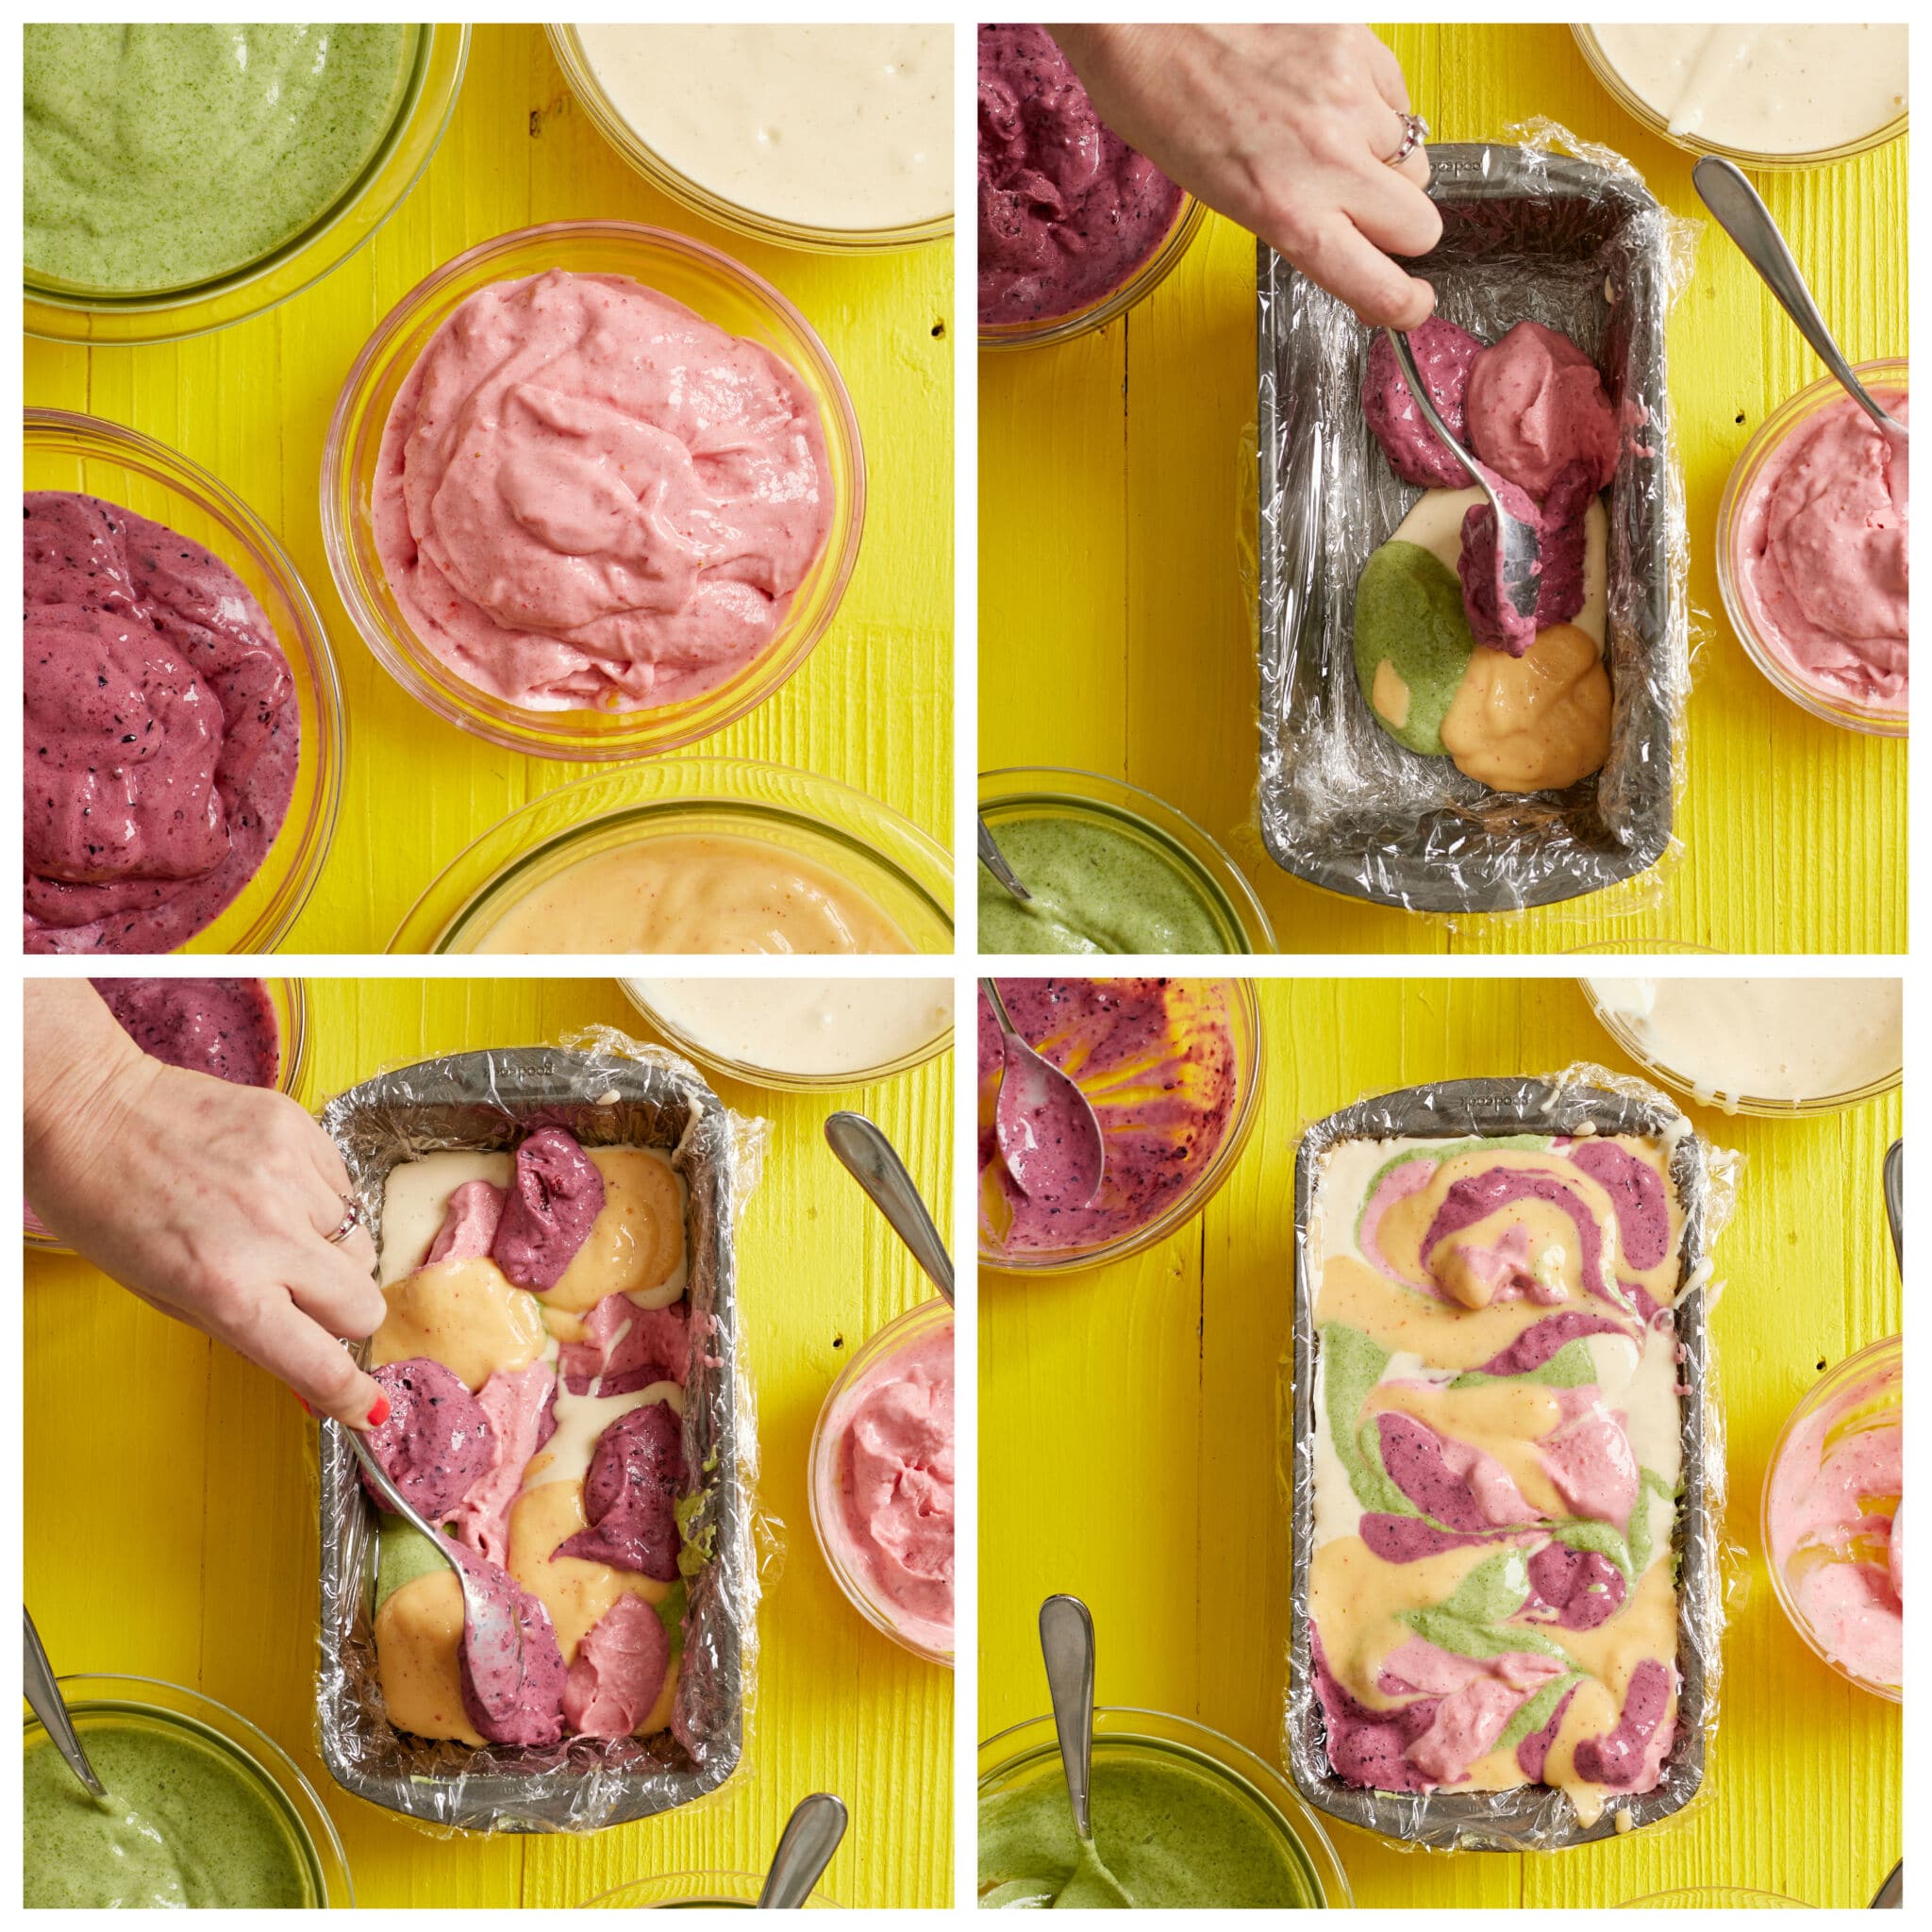 Step-by-step instructions on how to make tie dye popsicles: Puree and out each layer in individual bowls to keep the red, pink, green, light milky yellow and mango orange colors separate and bright. Spoon each completed puree randomly into the prepared pan. 